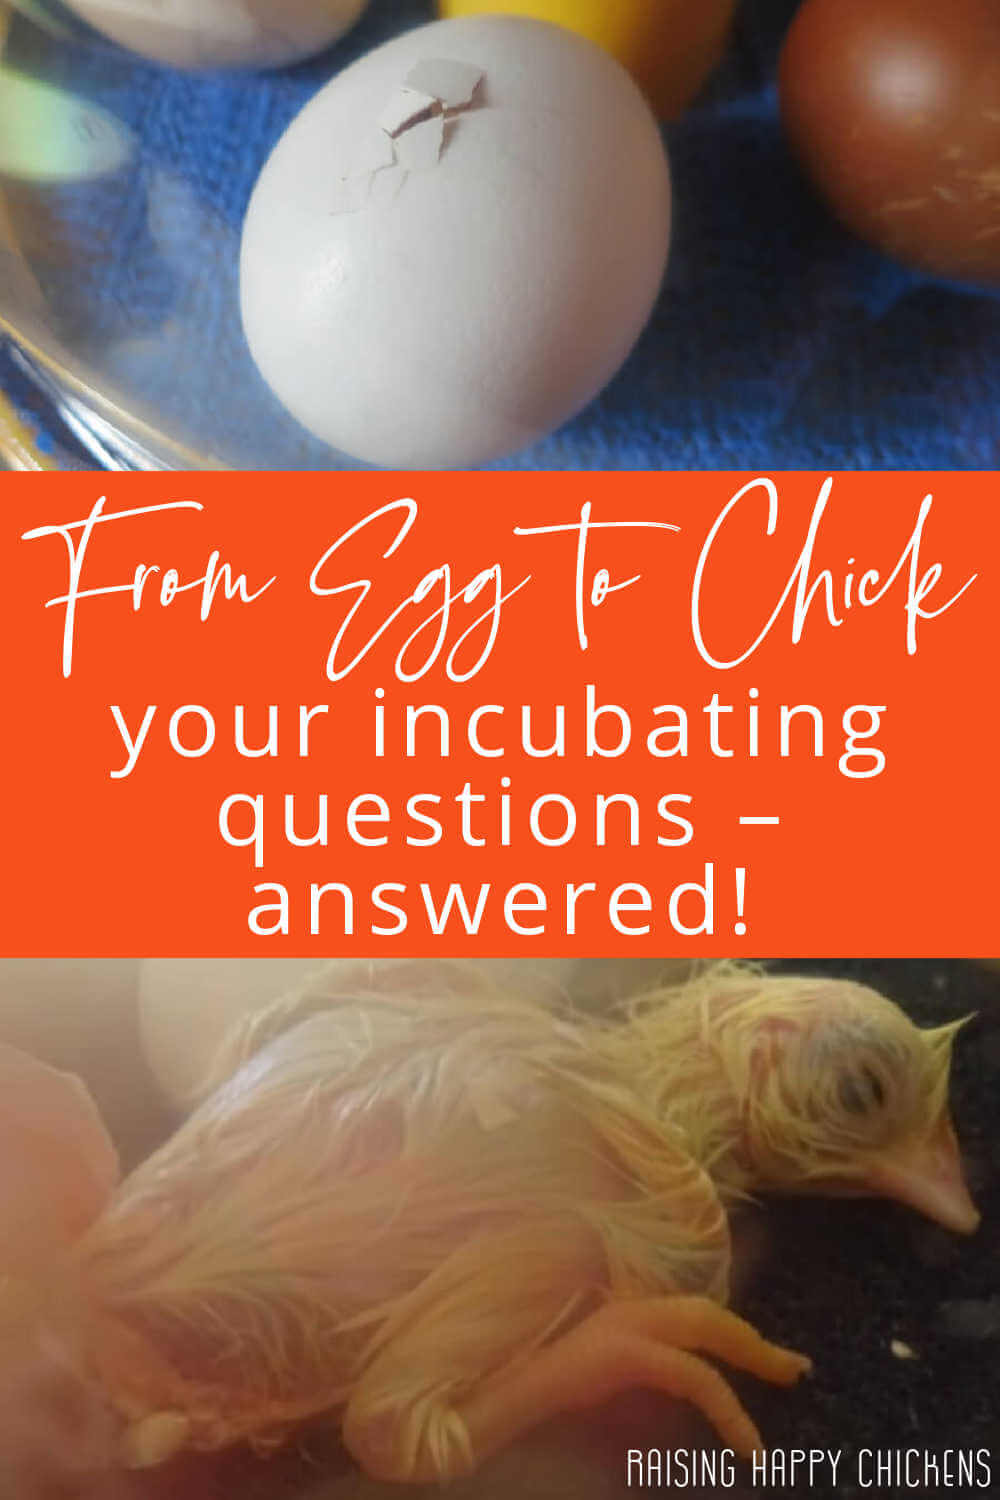 Incubating chicken eggs: your questions